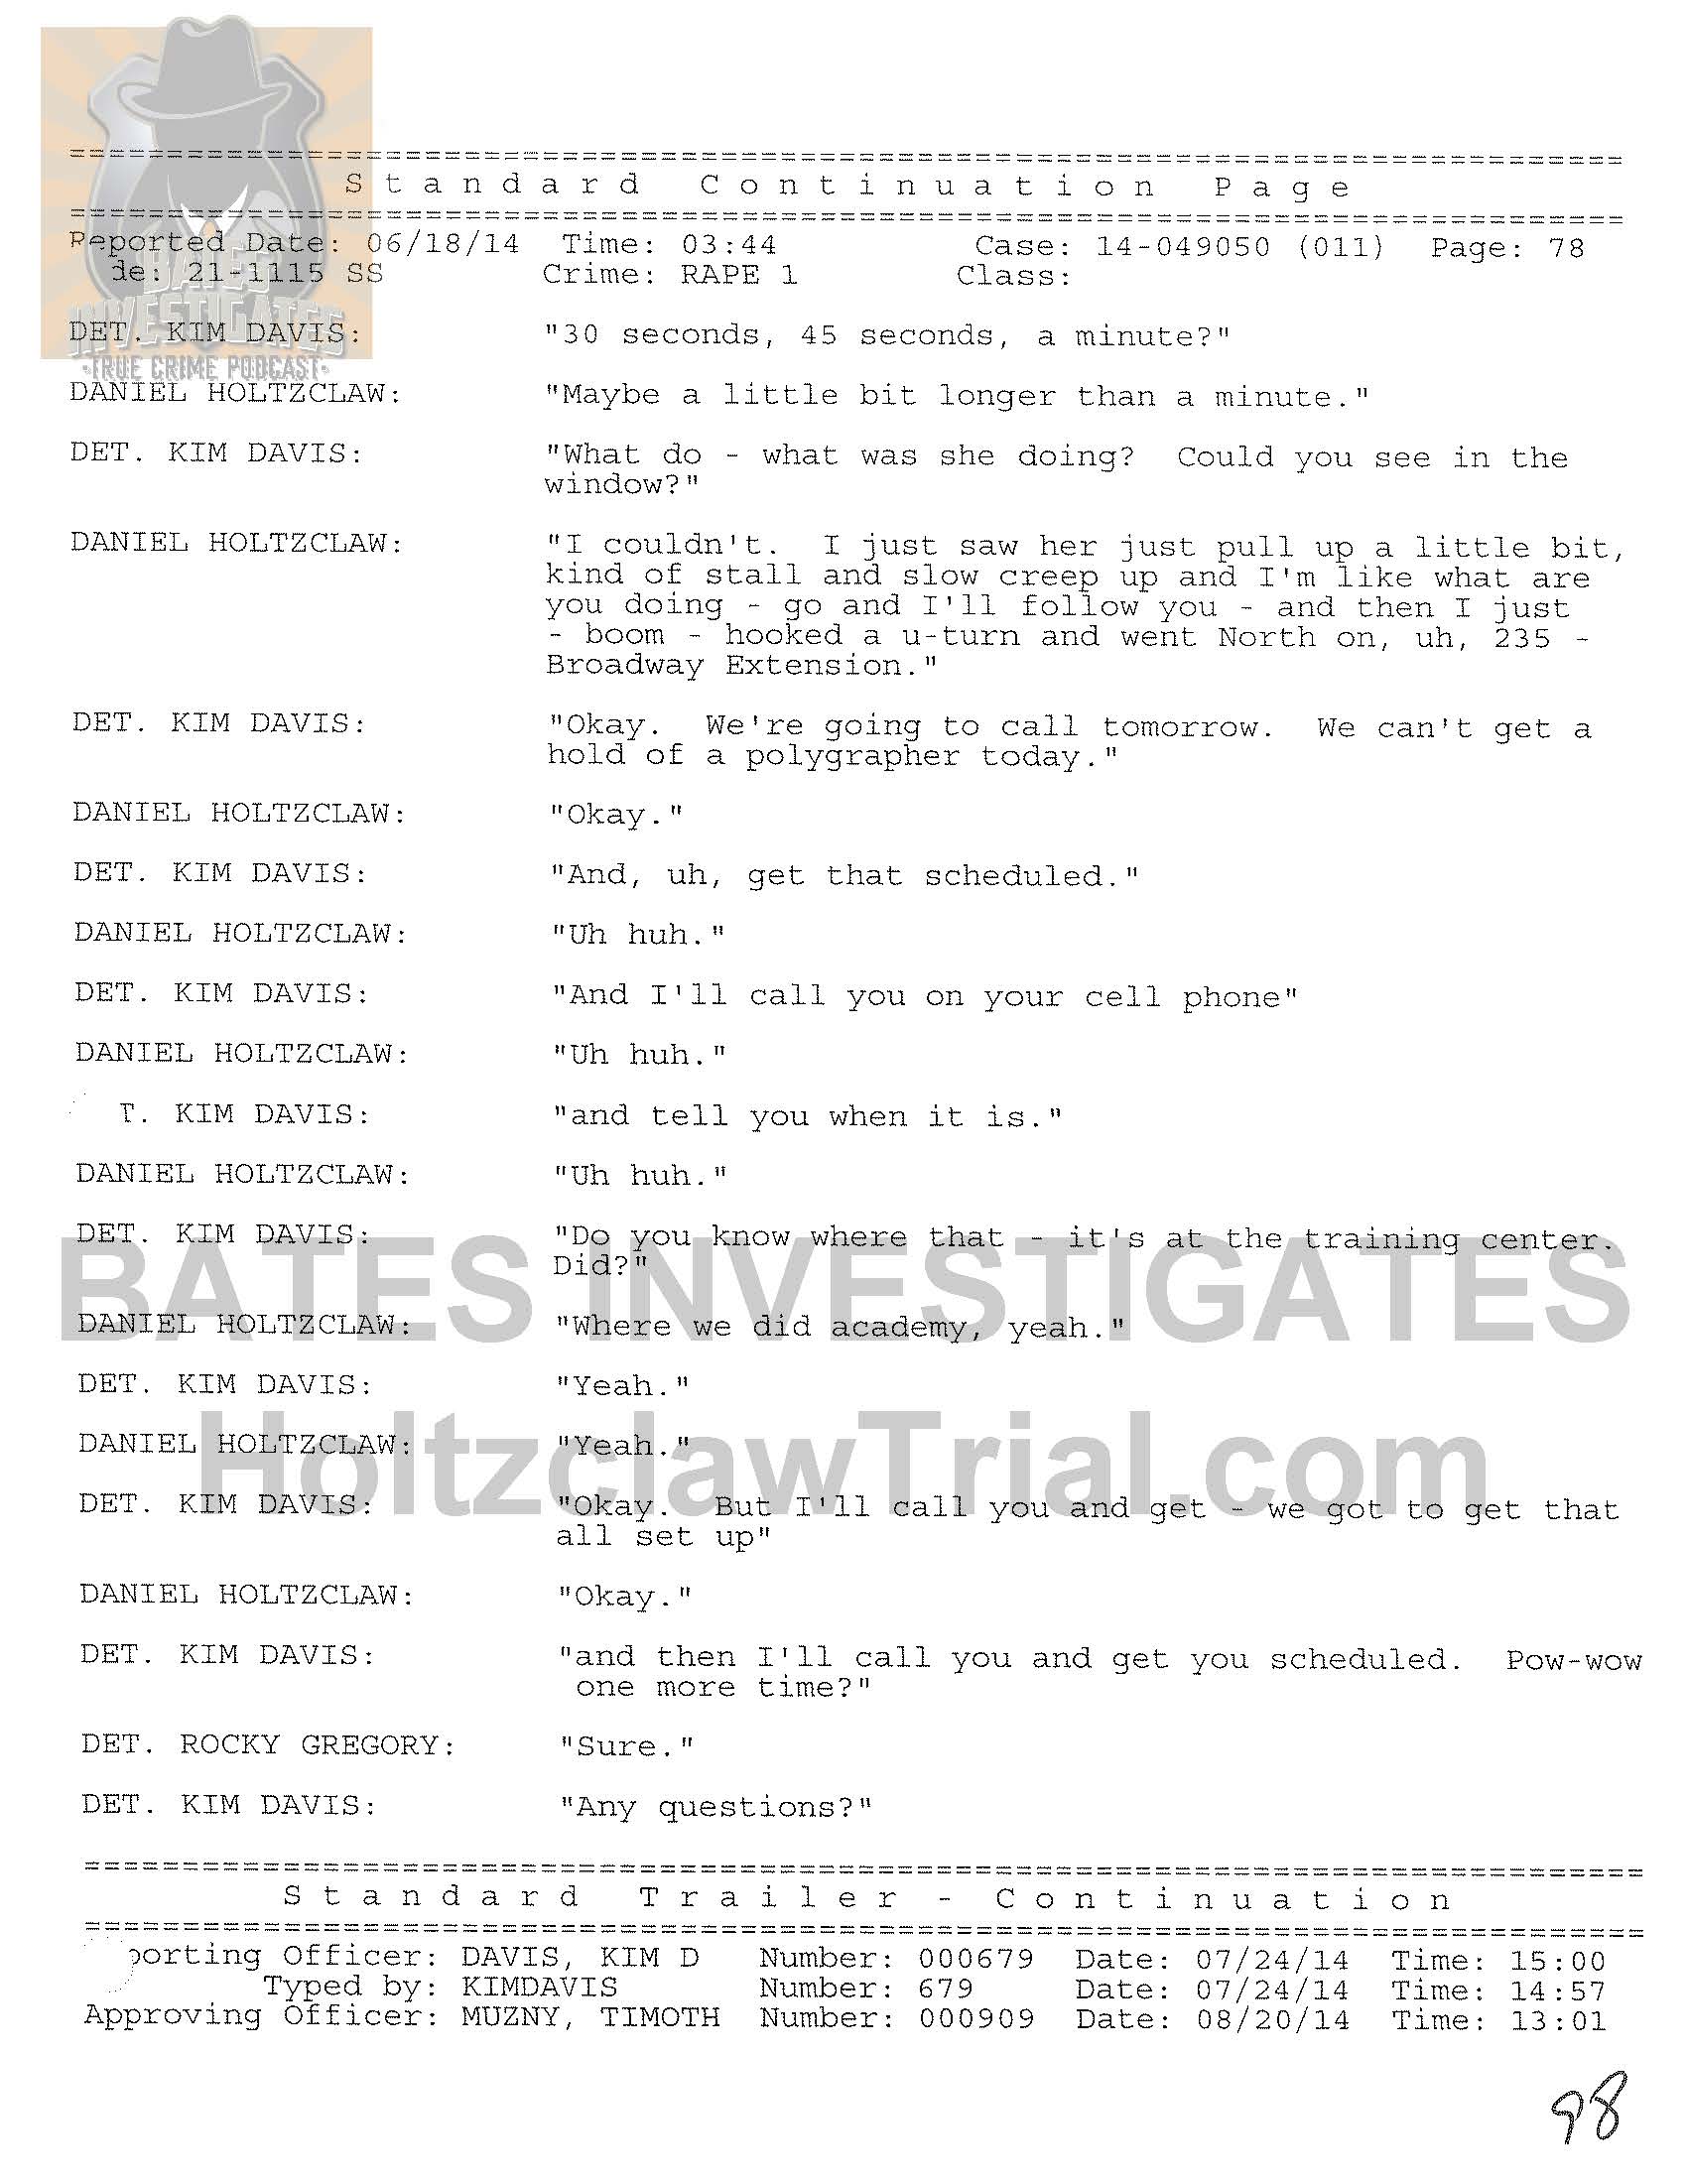 Holtzclaw Interrogation Transcript - Ep02 Redacted_Page_78.jpg